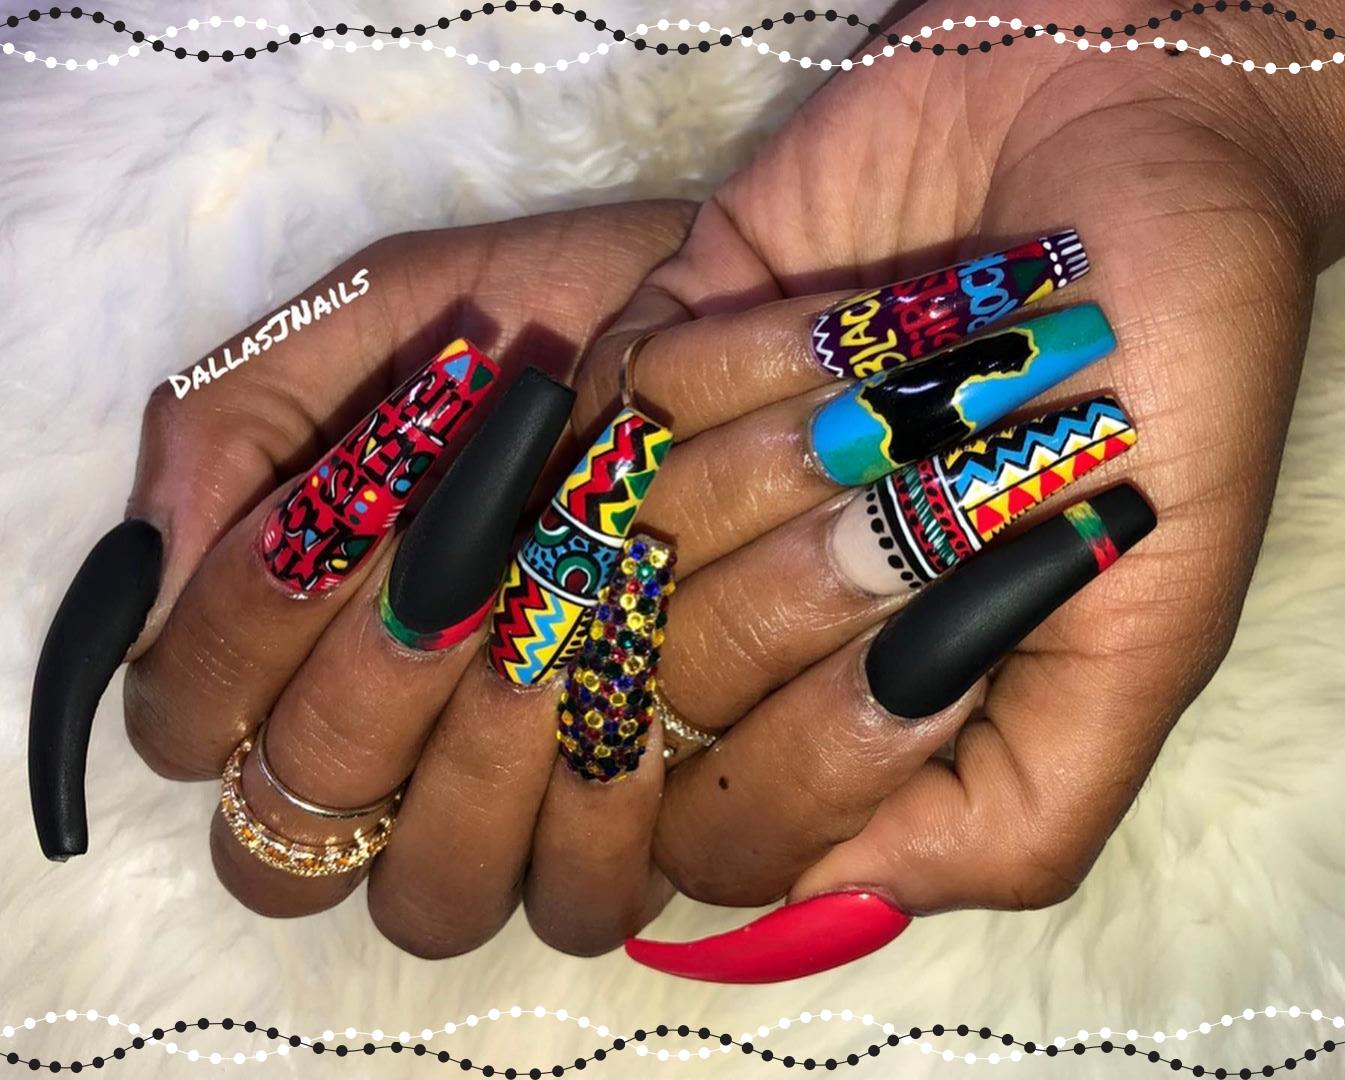 2. "African American Nail Designs" - wide 4